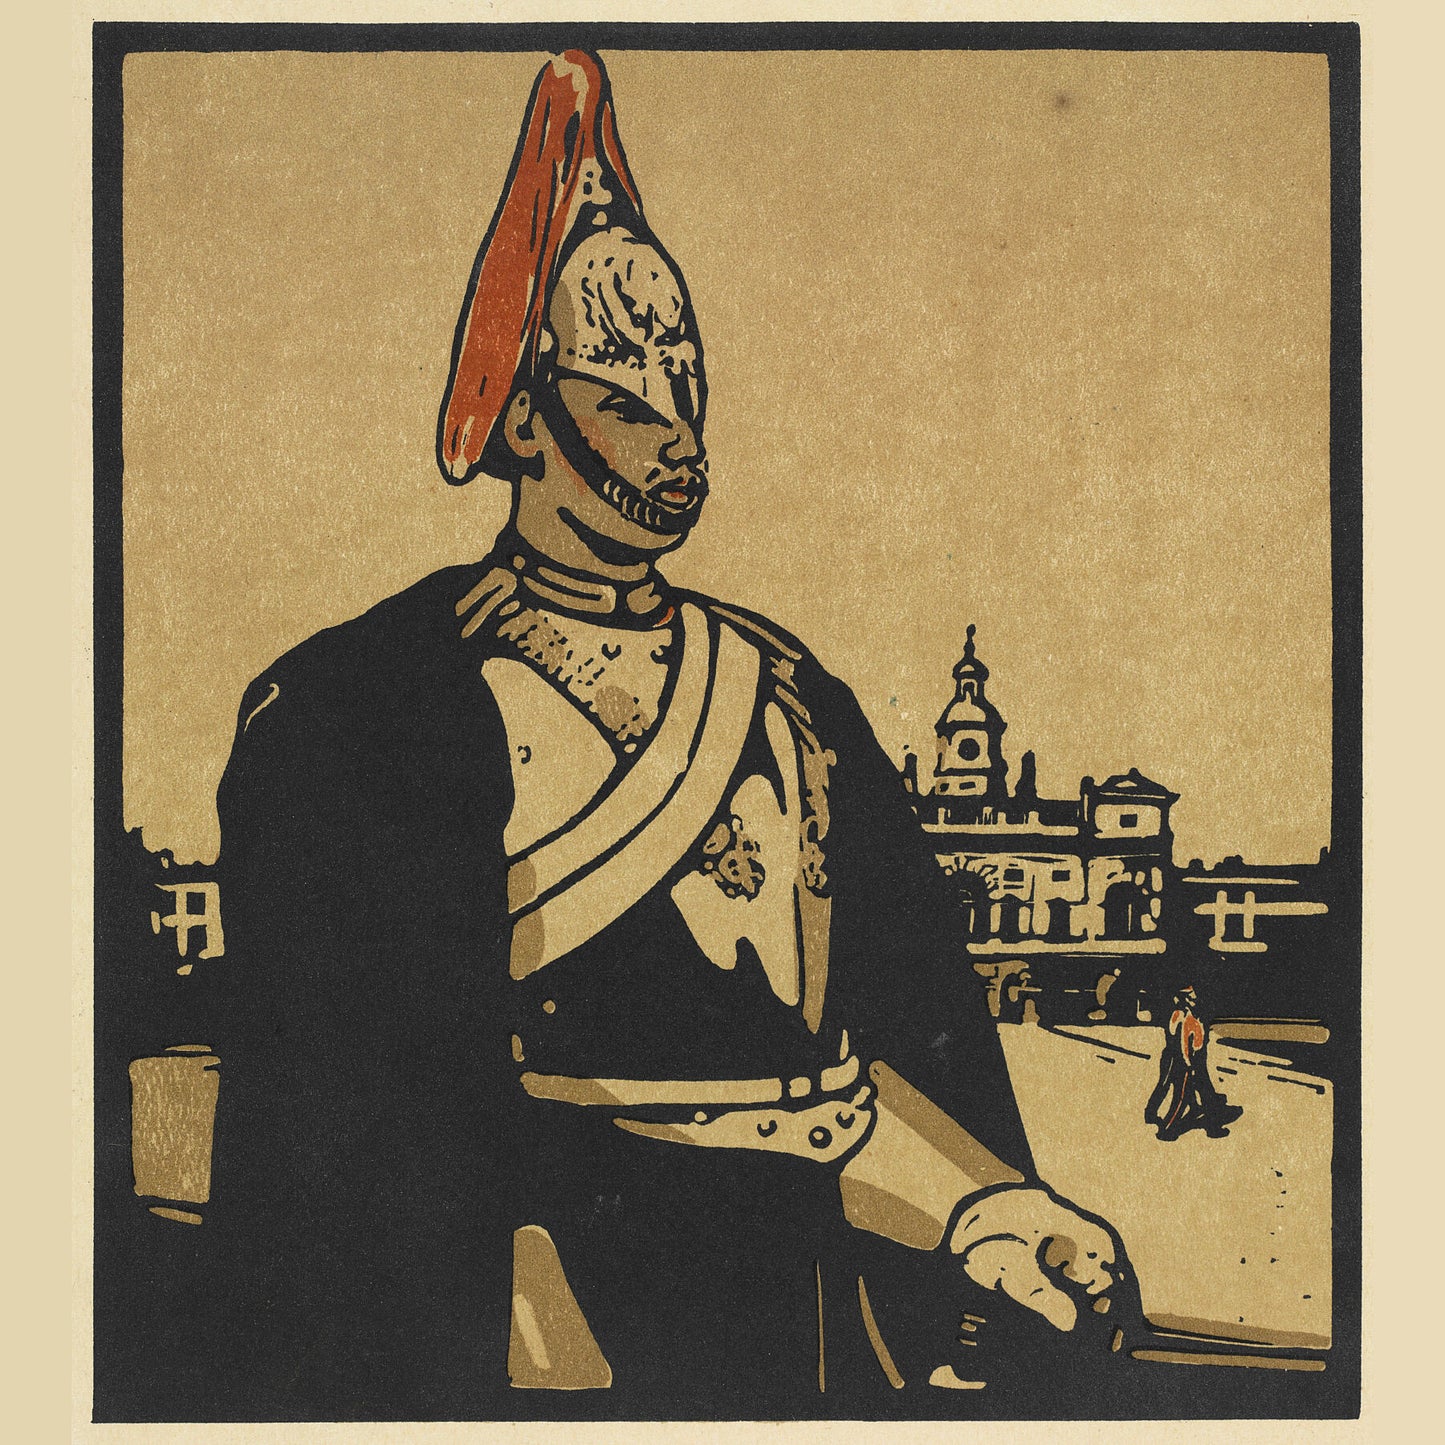 London Types : Guarsdman by William Nicholson - 1898.  Printmaker William Nicholson worked in partnership with his brother-in-law James Pryde, under the pseudonym the Beggarstaff Brothers.